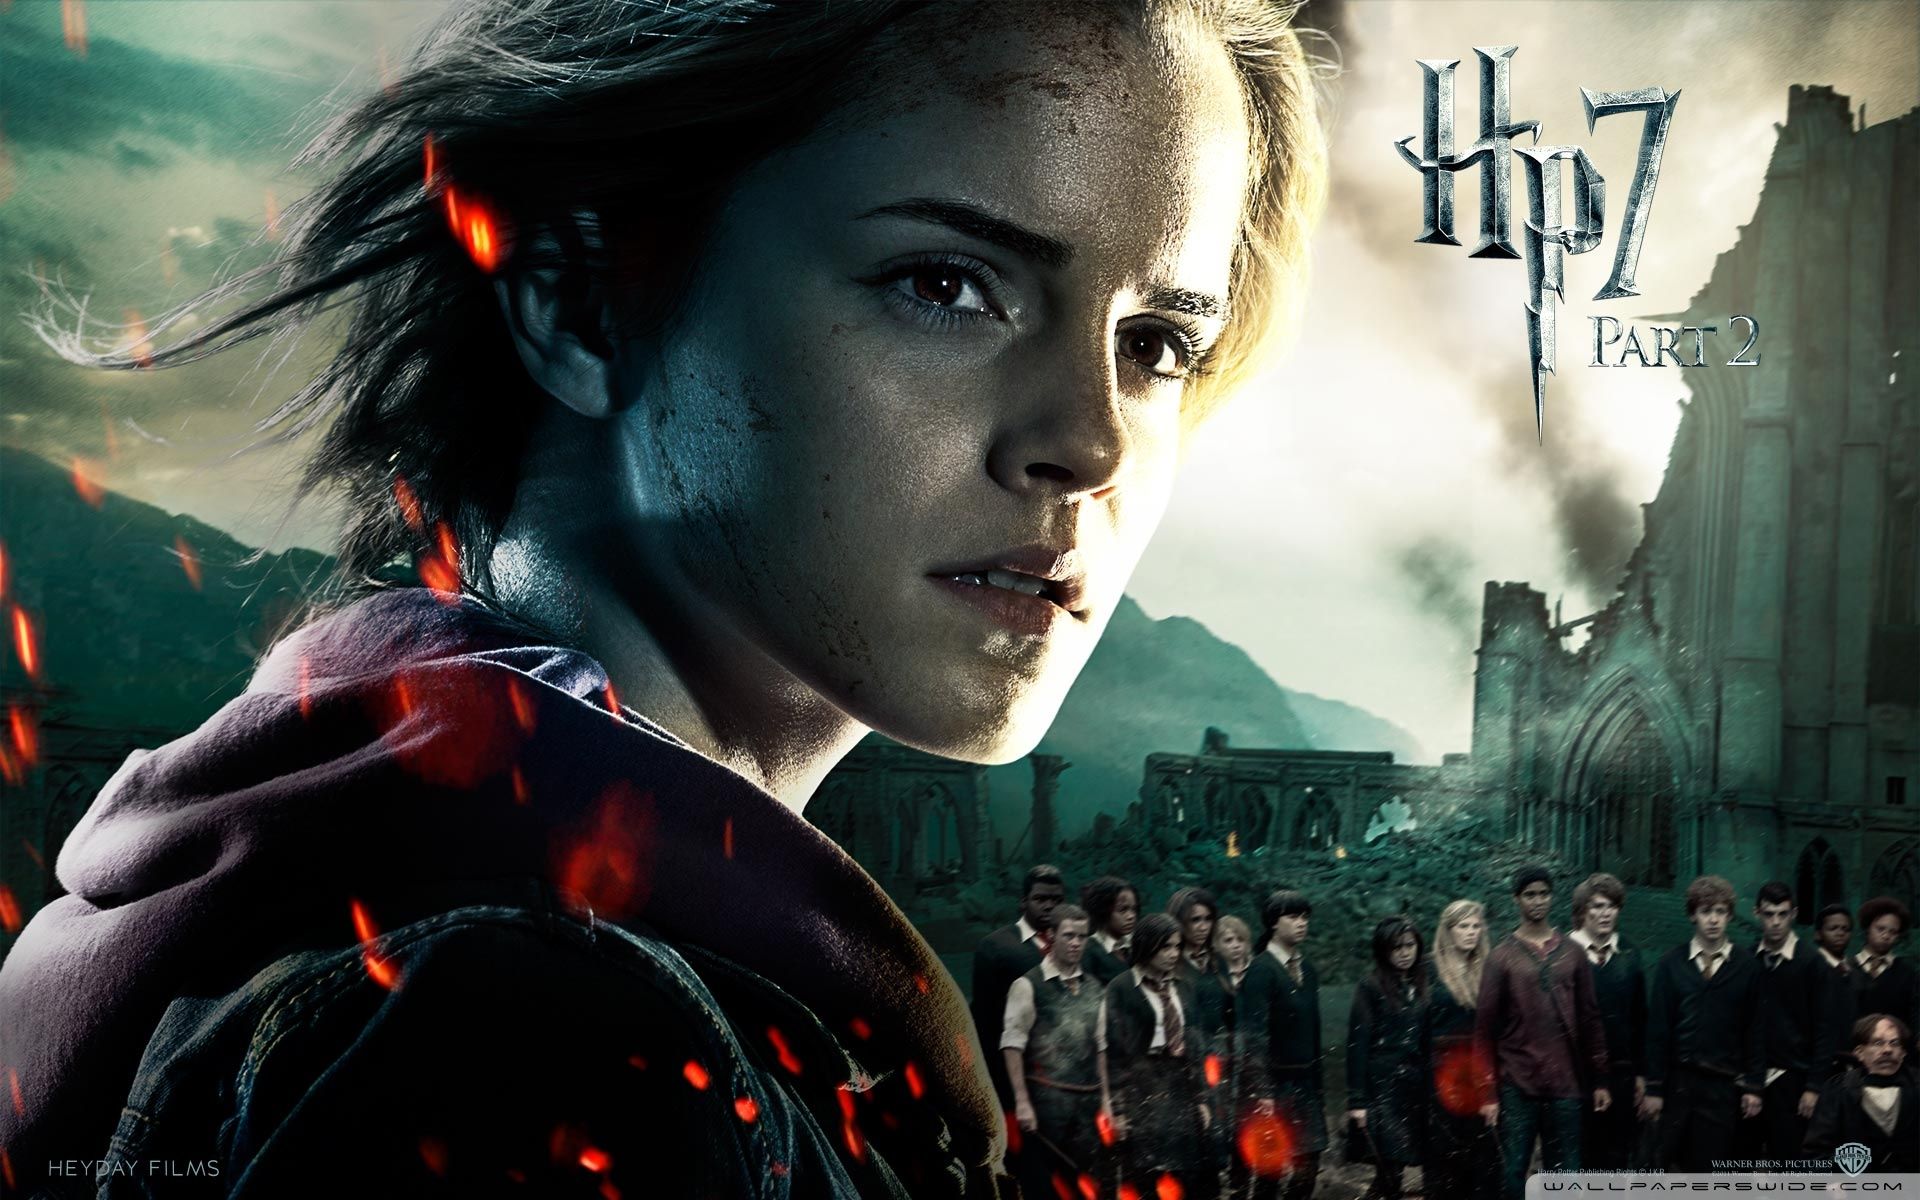 Harry Potter Deathly Hallows Part 2 In Hindi Free Download